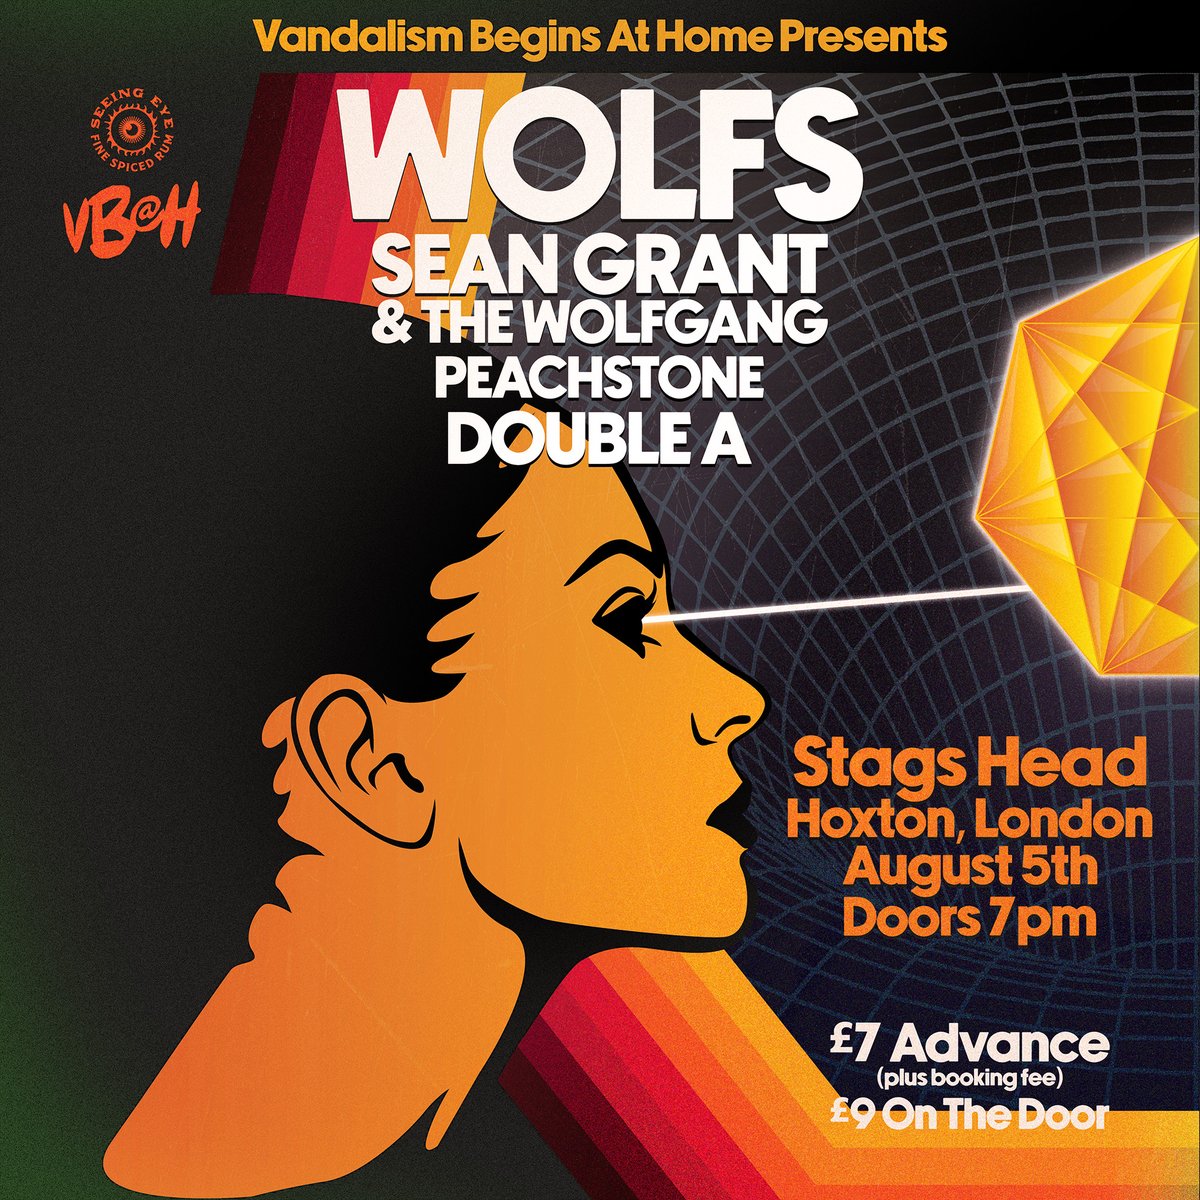 We're heading to the big smoke for one hell of a gig! VB@H Presents: @WOLFStheband @sgwolfgang @peachstonemusic & Double A at @TheStagsHeadHox £7 adv / £9 OTD eventbrite.com/e/618081156377 Get this in your diaries and we'll see you down the front! eventbrite.com/e/618081156377